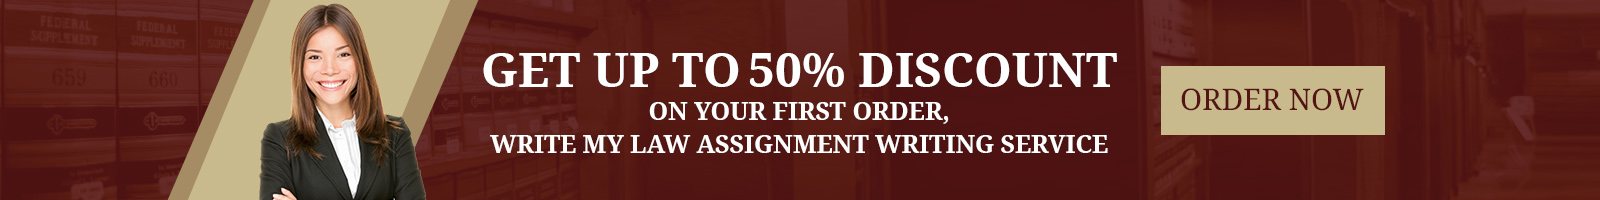 Write My Law Assignment writing service